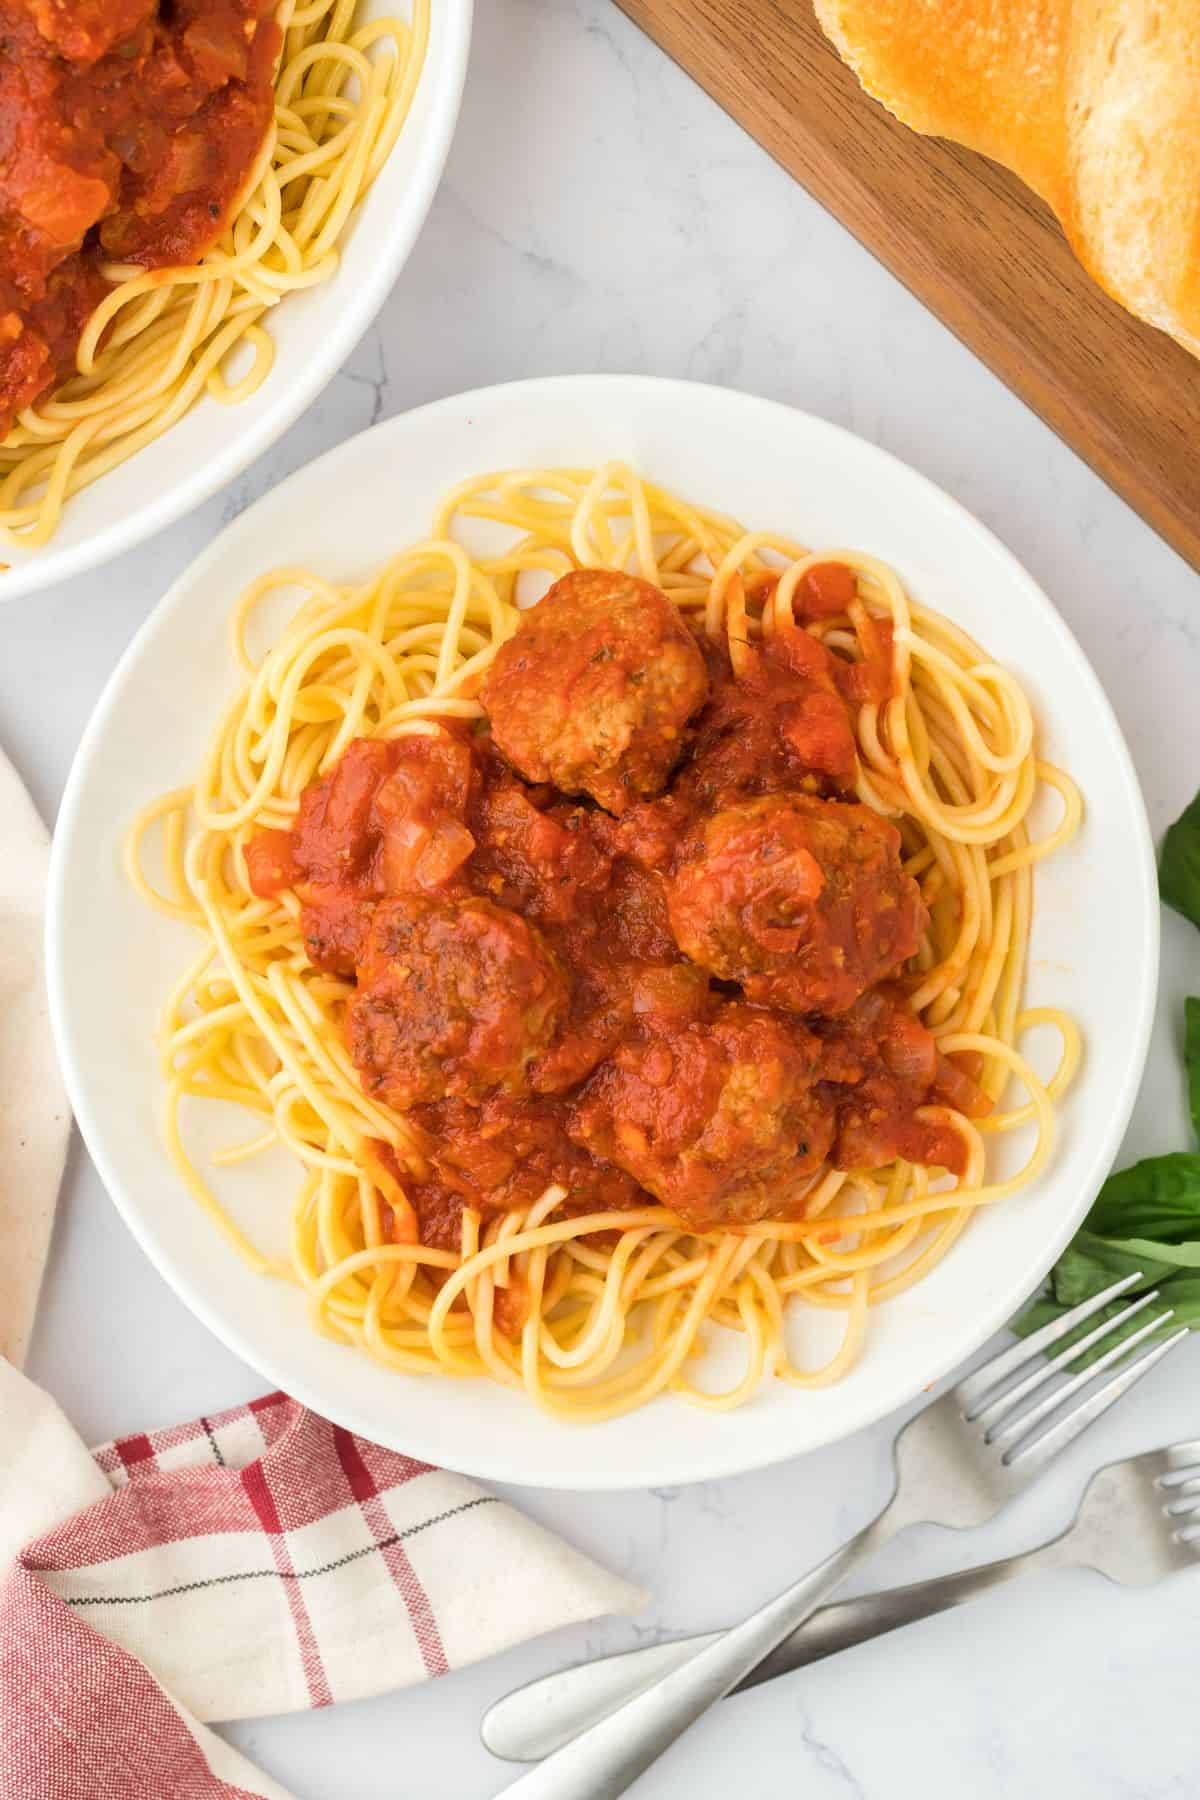 A plate of soul food spaghetti and meatballs on a white plate with a another serving bowl in the corner and a loaf of bread.